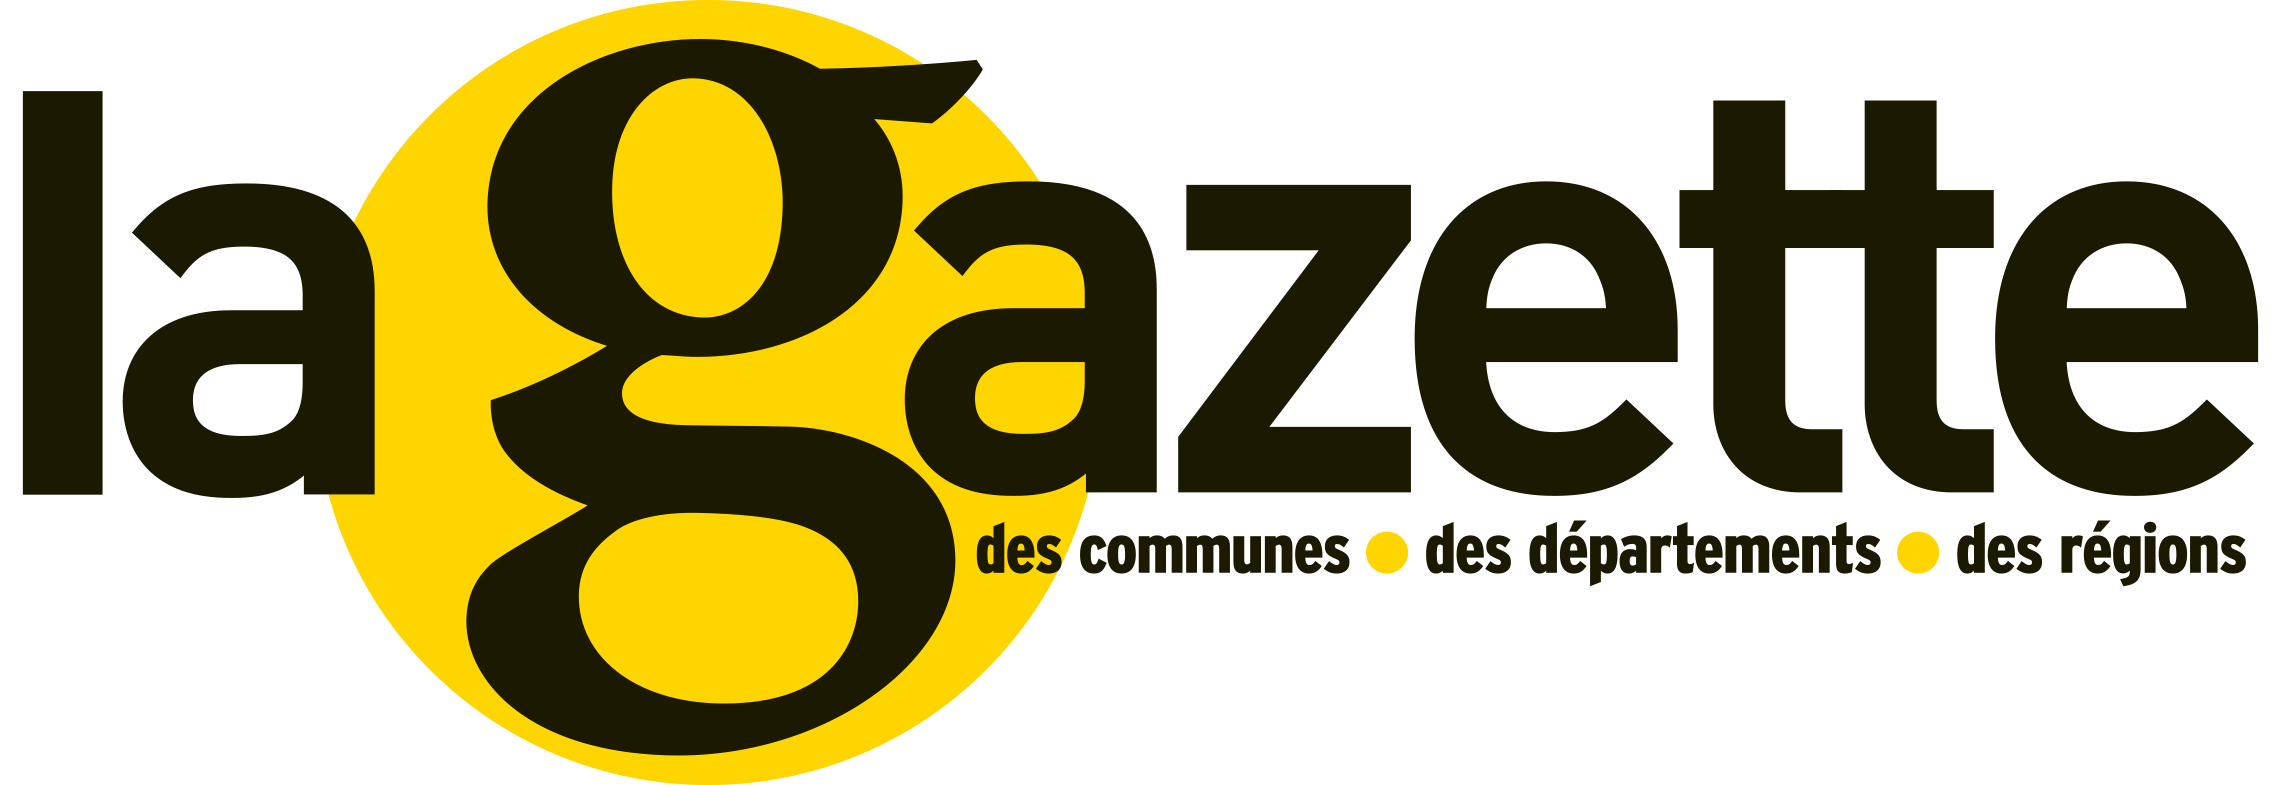 The Gazette des communes, departments and regions is a weekly French magazine published by Groupe Infopro Digital